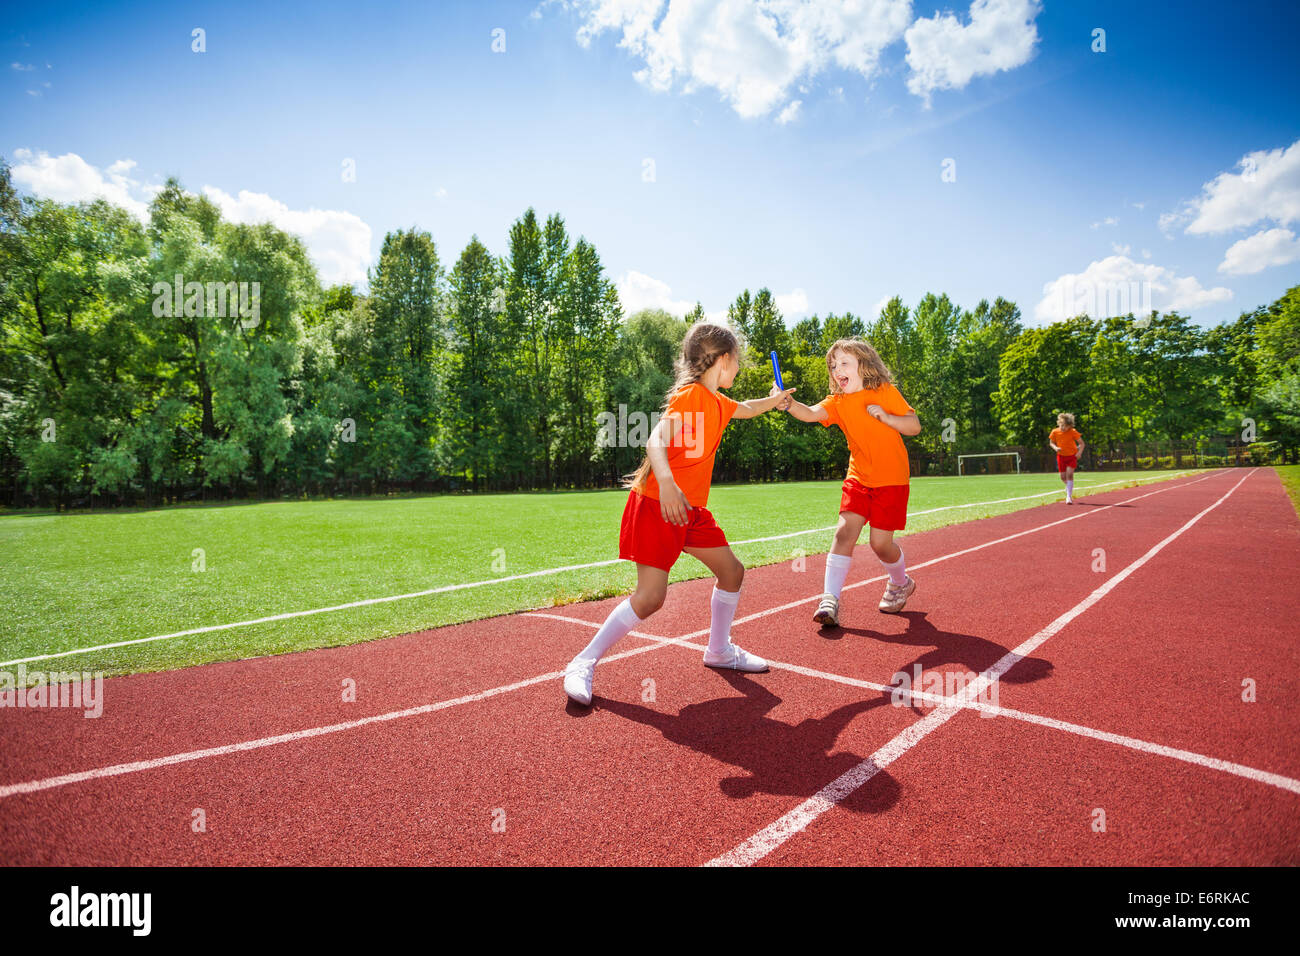 Girl with baton runs and hands it to other runner Stock Photo